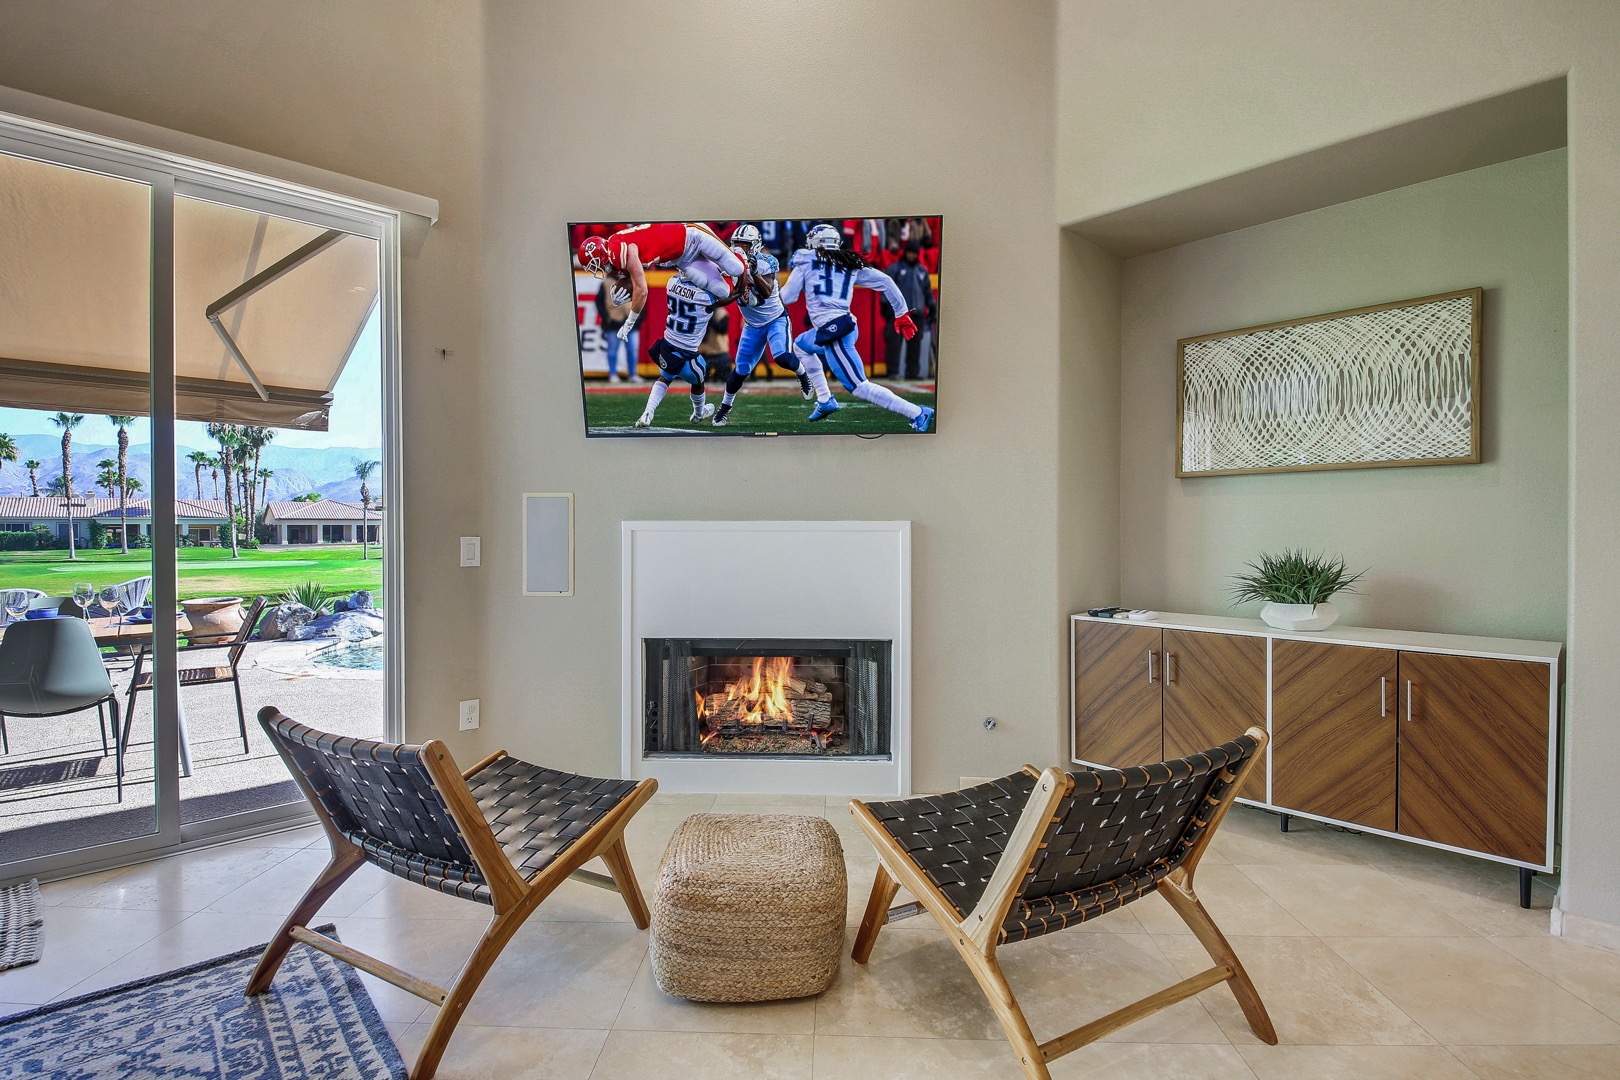 Finished with your meal and still want to hang out? Move over to to the lounge area which features two chairs, a fireplace and a 65-inch Samsung HDTV.